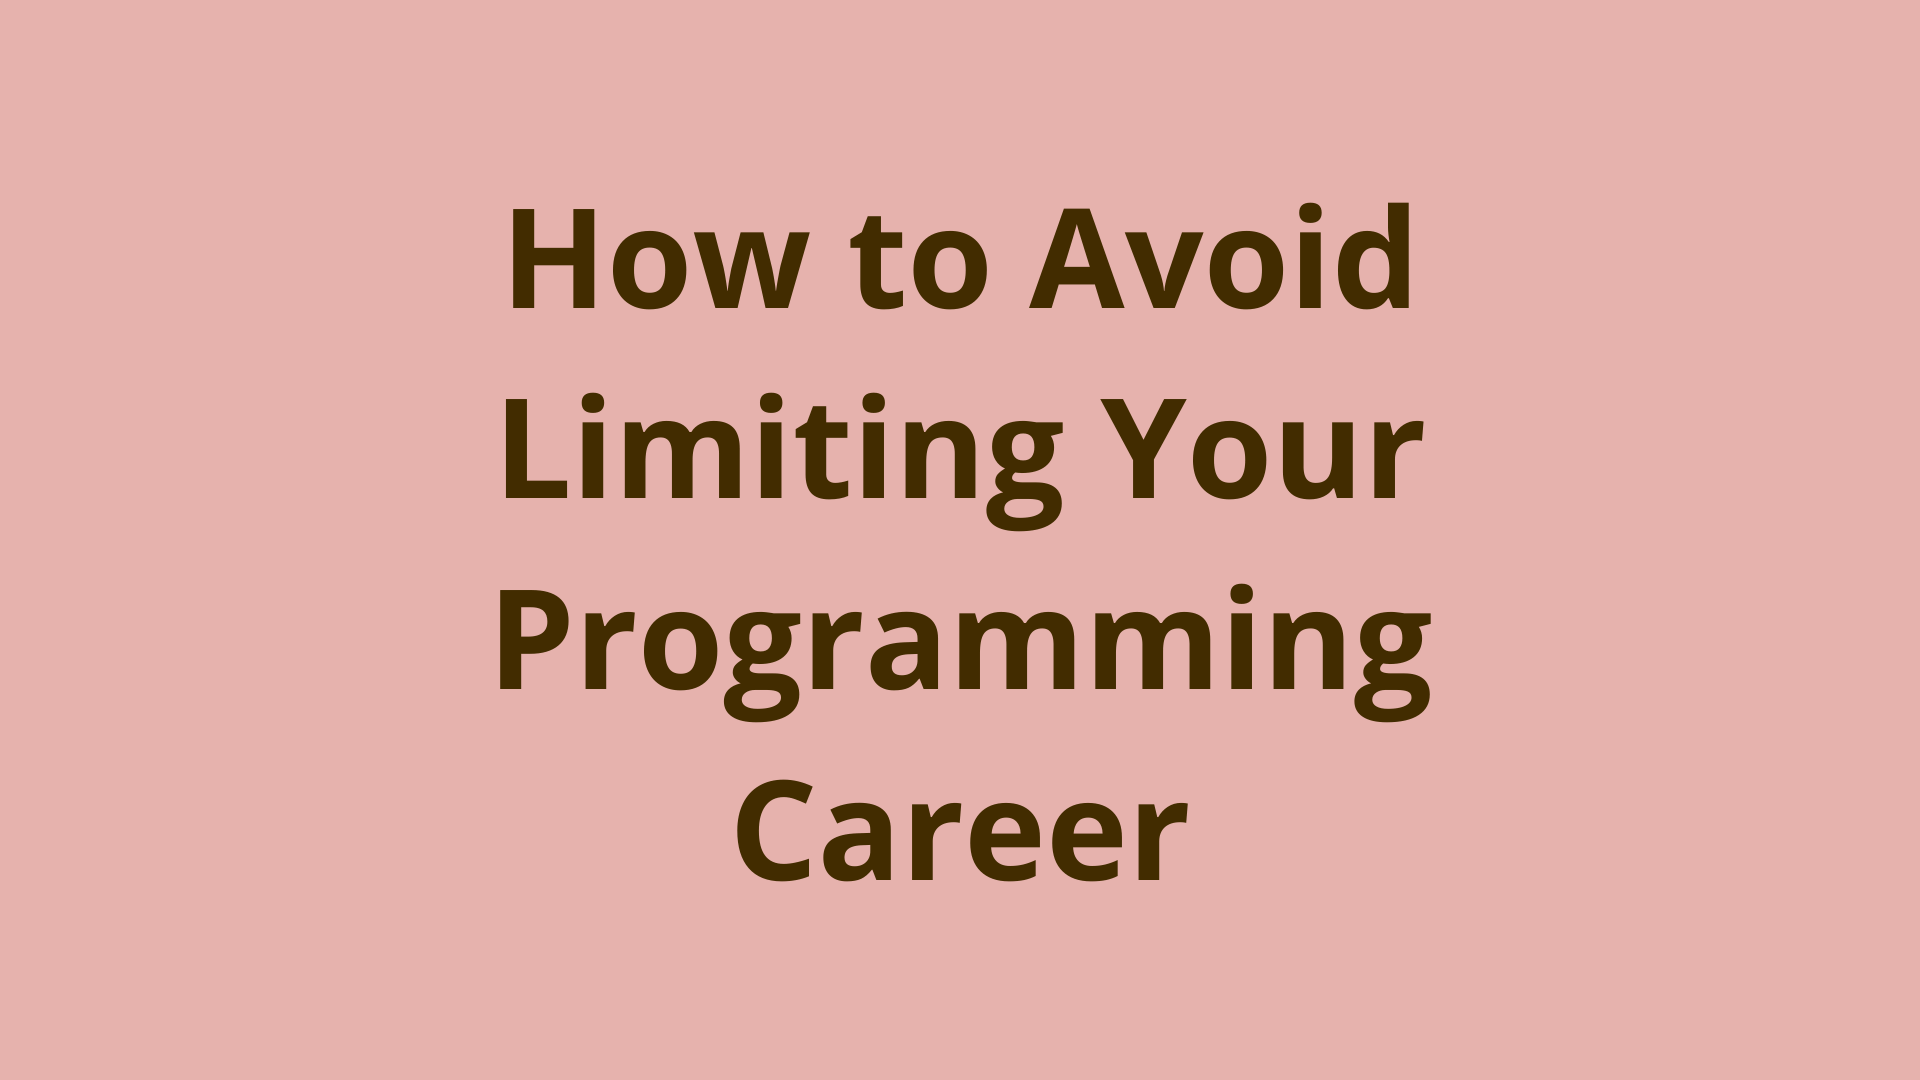 Image of How to avoid limiting your programming career